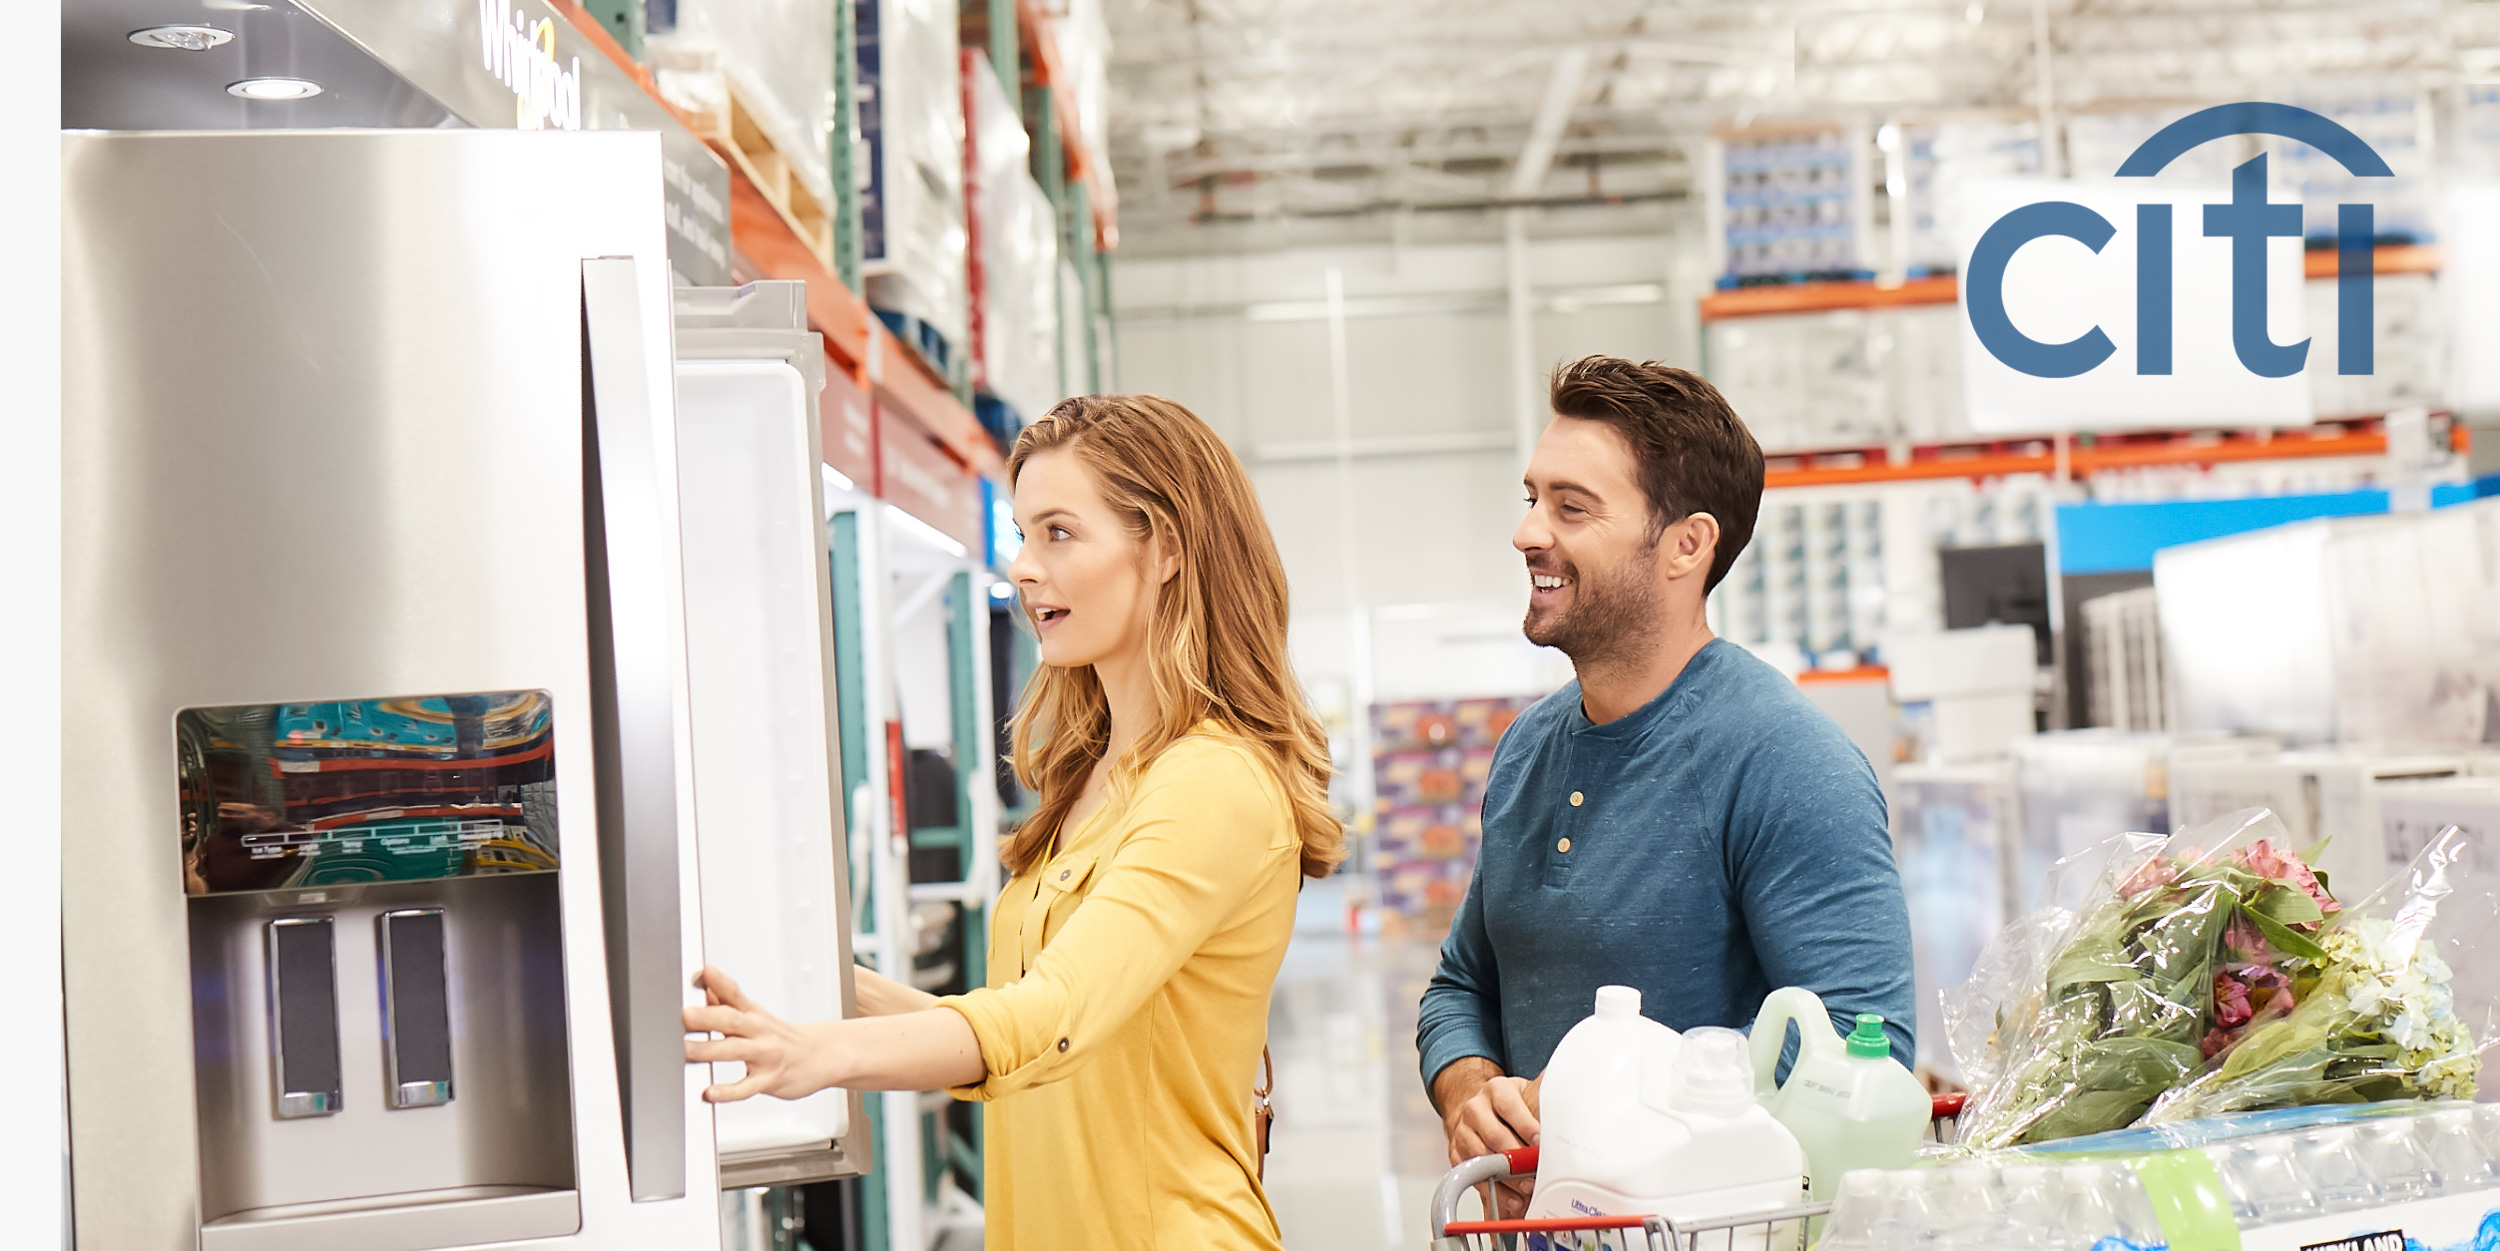 A woman and her husband shop for appliances at Costco in a Citibank Ad Campaign photographed by Lifestyle Photographer Diana Mulvihill